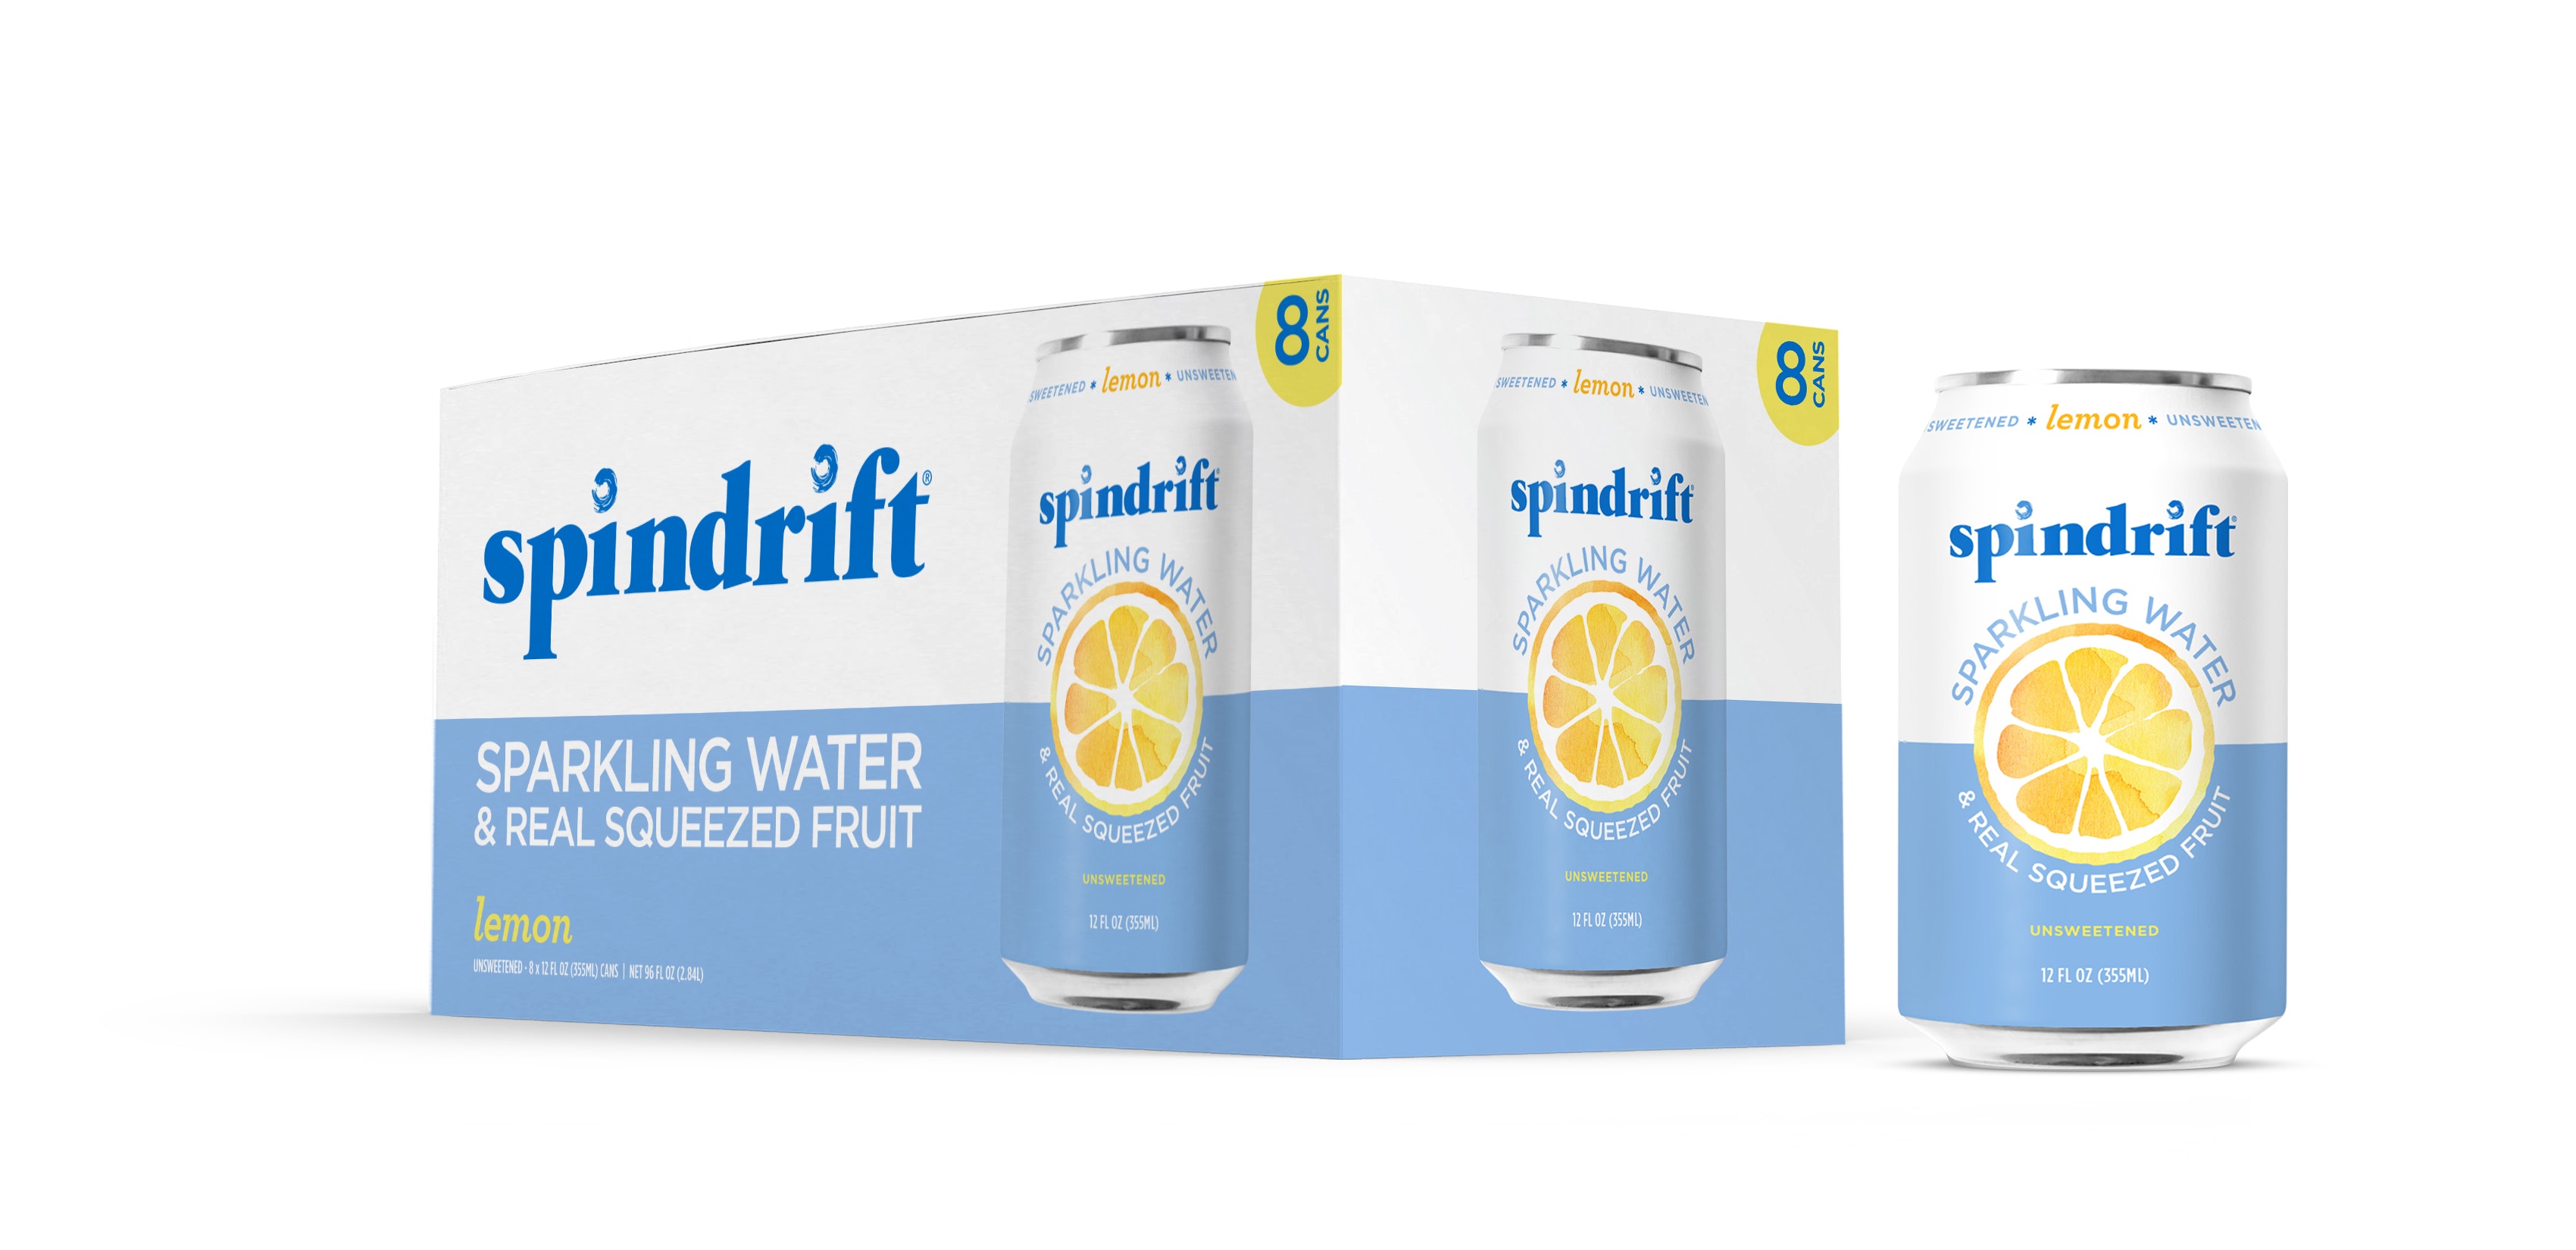 Spindrift Sparkling Water, Lemon Flavored, Made with Real Squeezed Fruit,12 fl oz, 8 Count, No Sugar Added, 3 Calories per Can - image 2 of 7